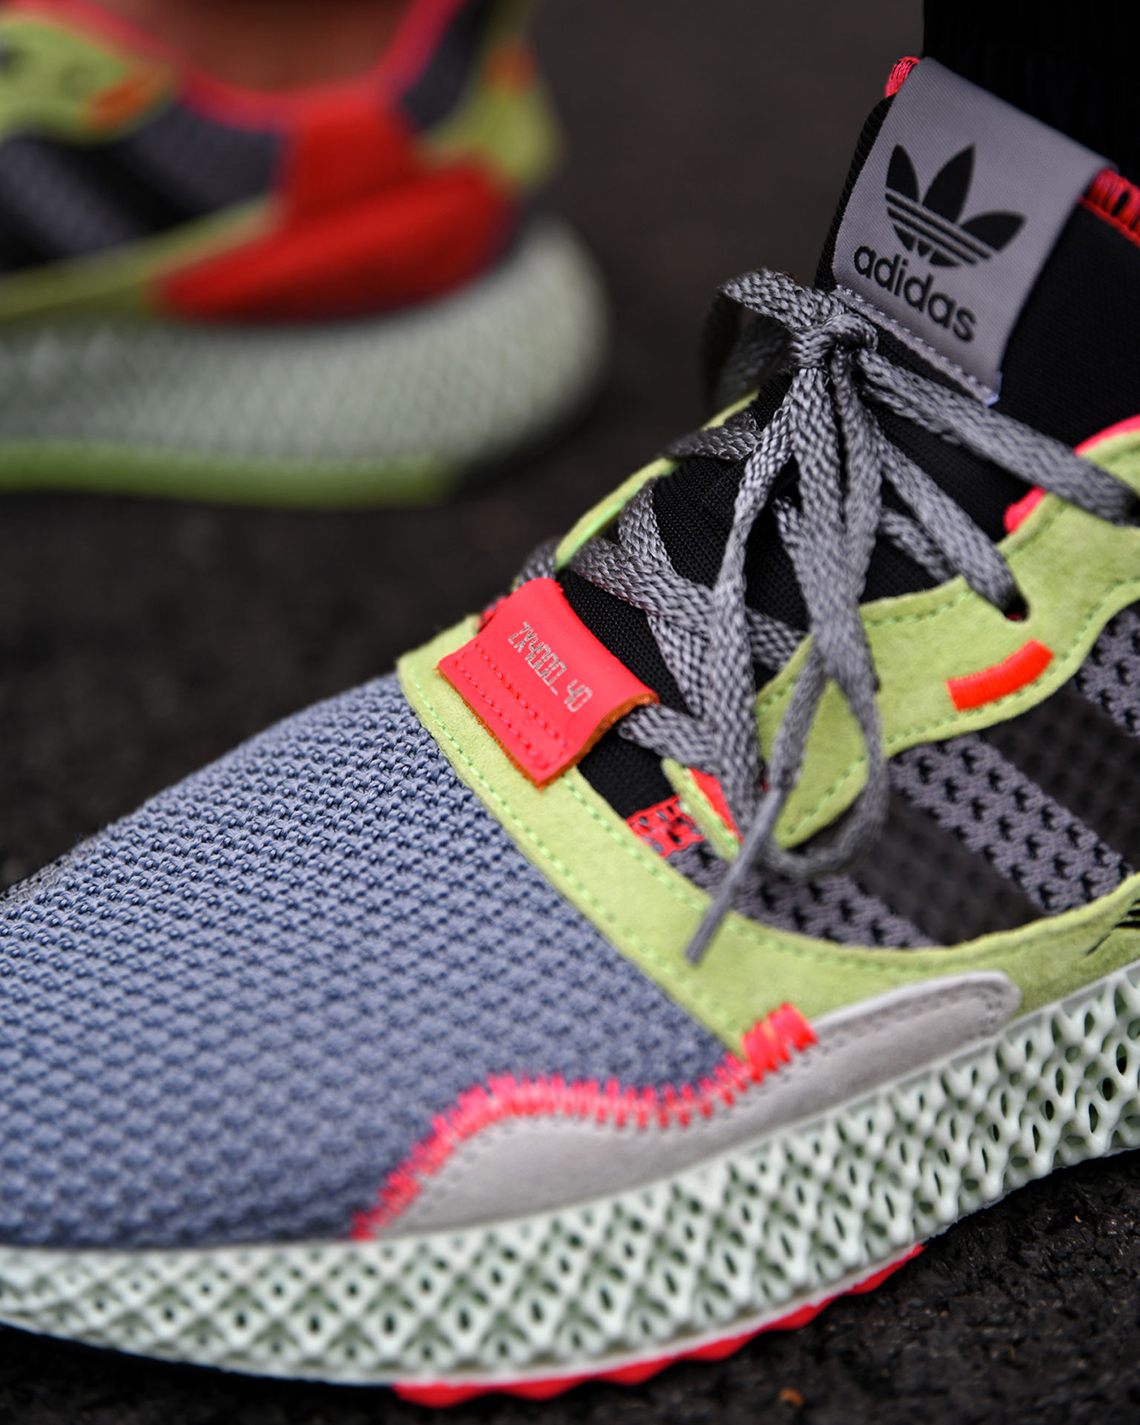 adidas zx 4000 4d for sale